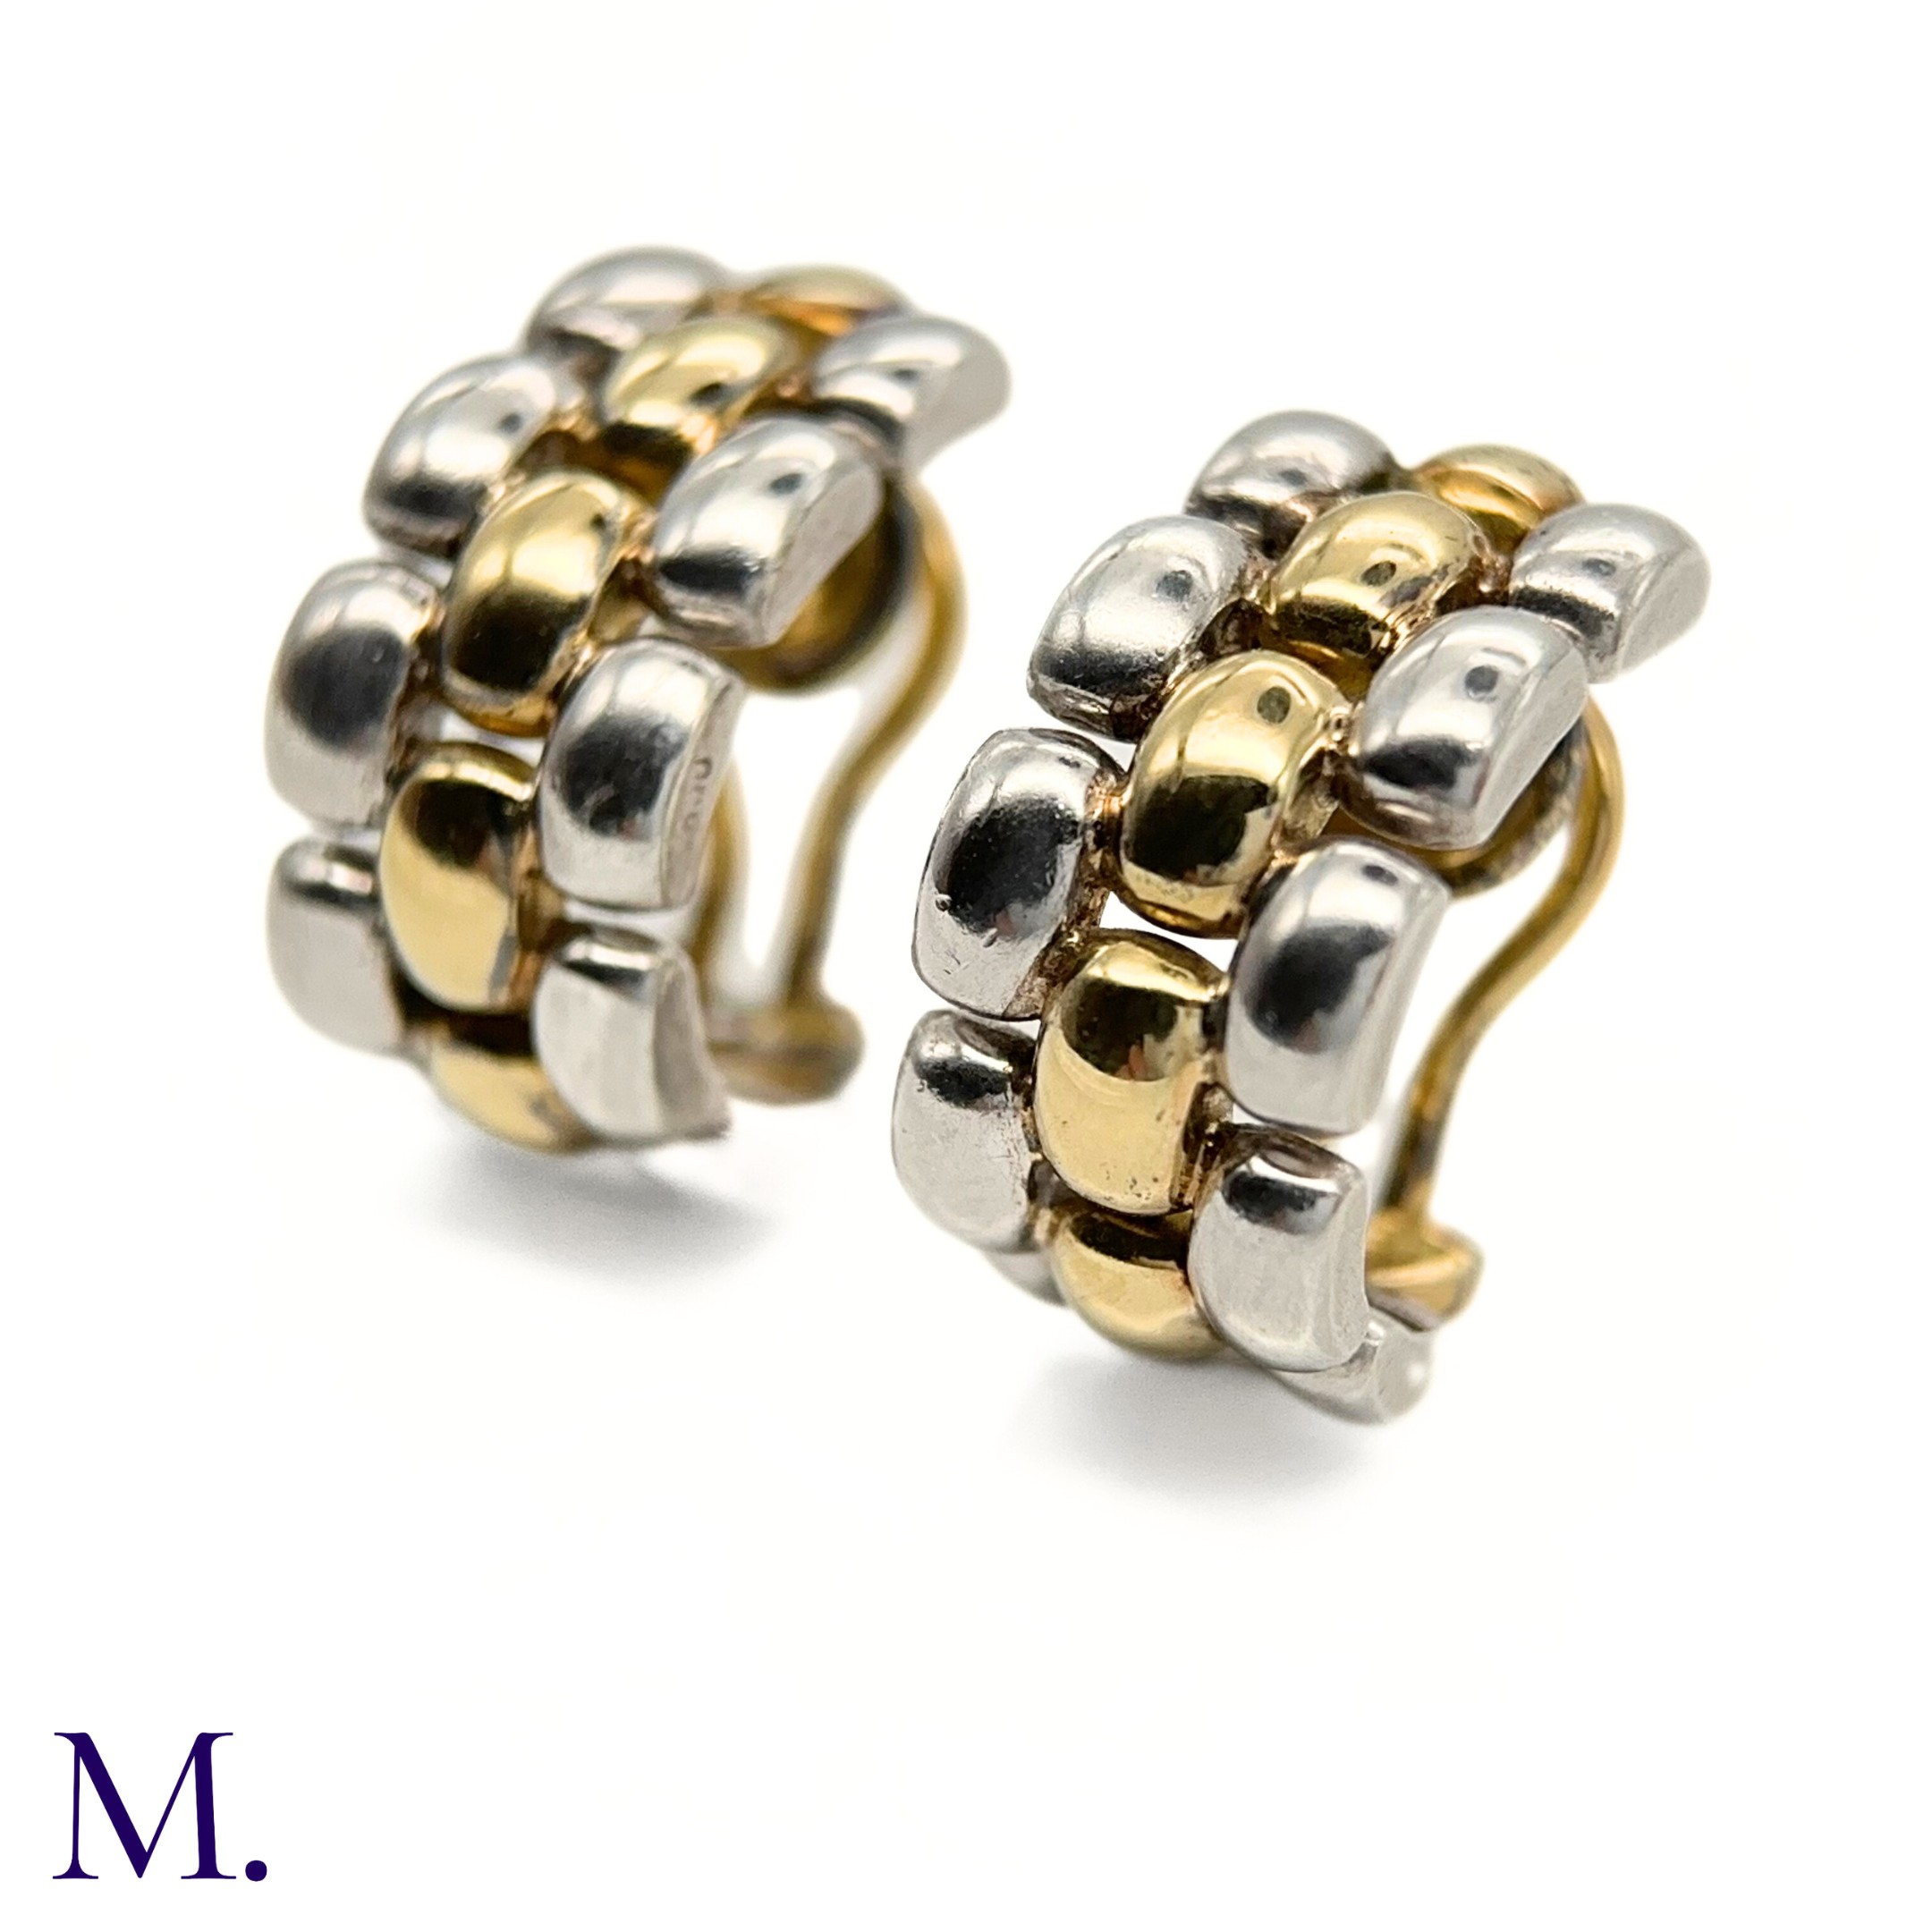 A Pair of Gold and Silver Earclips by Chopard - Image 3 of 4